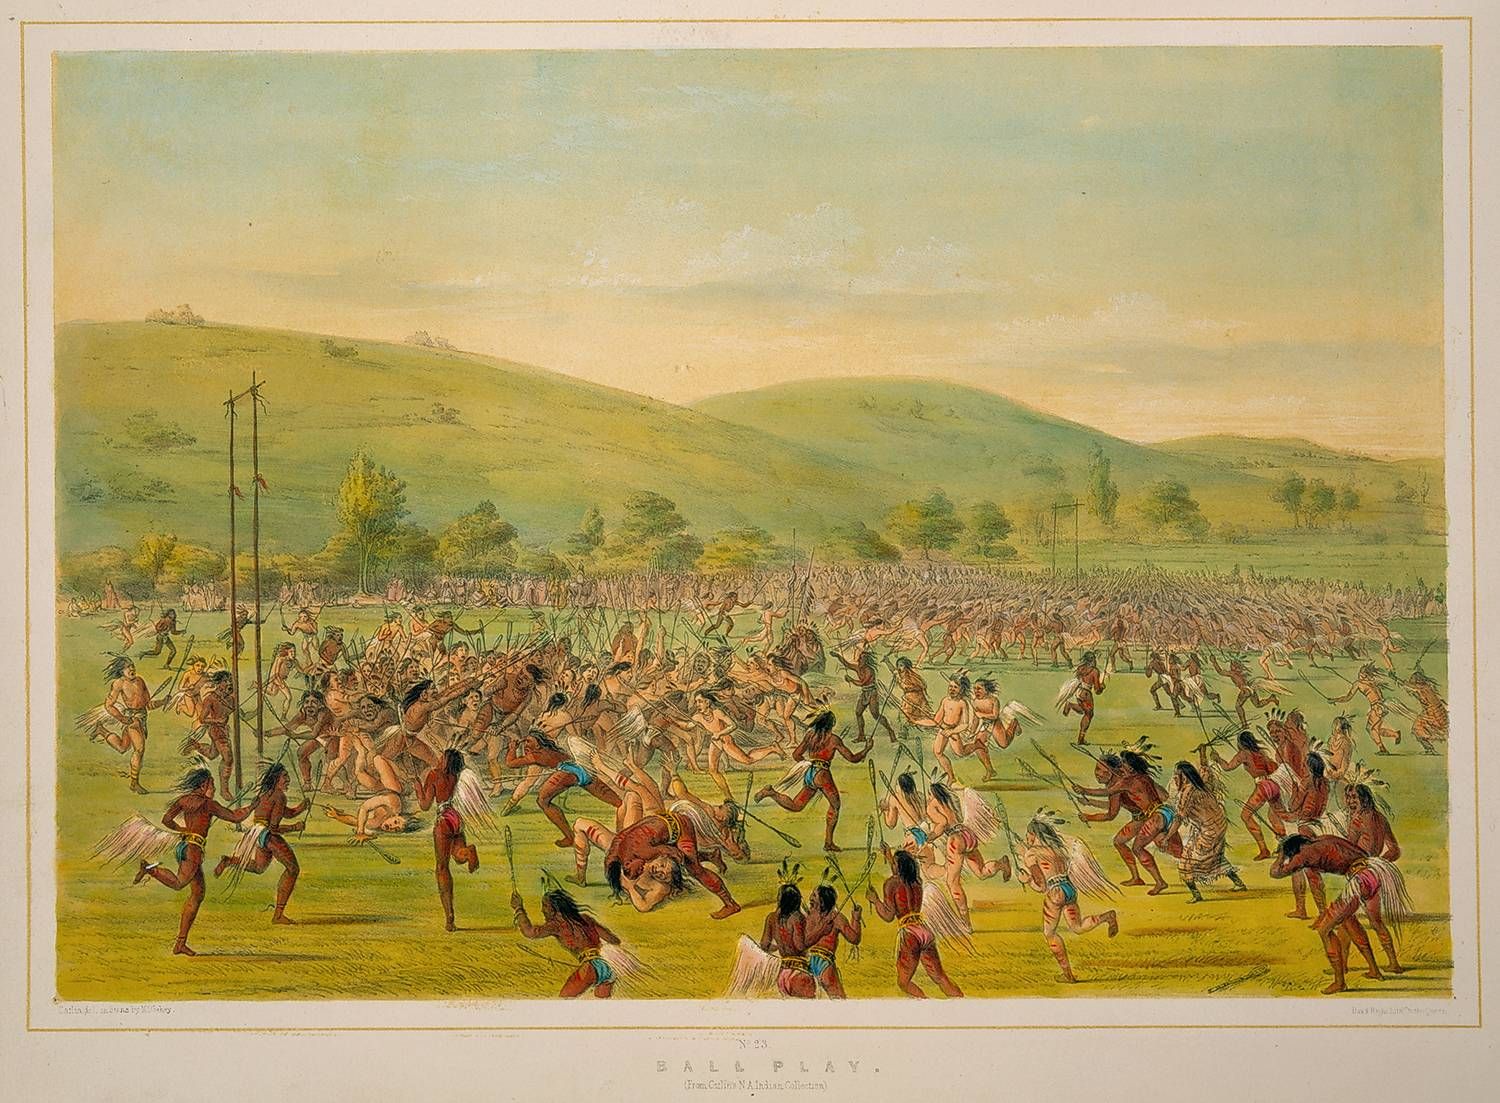 Ball Play (La Crosse). Lithograph by George Catlin, undated (1966.48.69). Art collection of the Smithsonian American Art Museum.